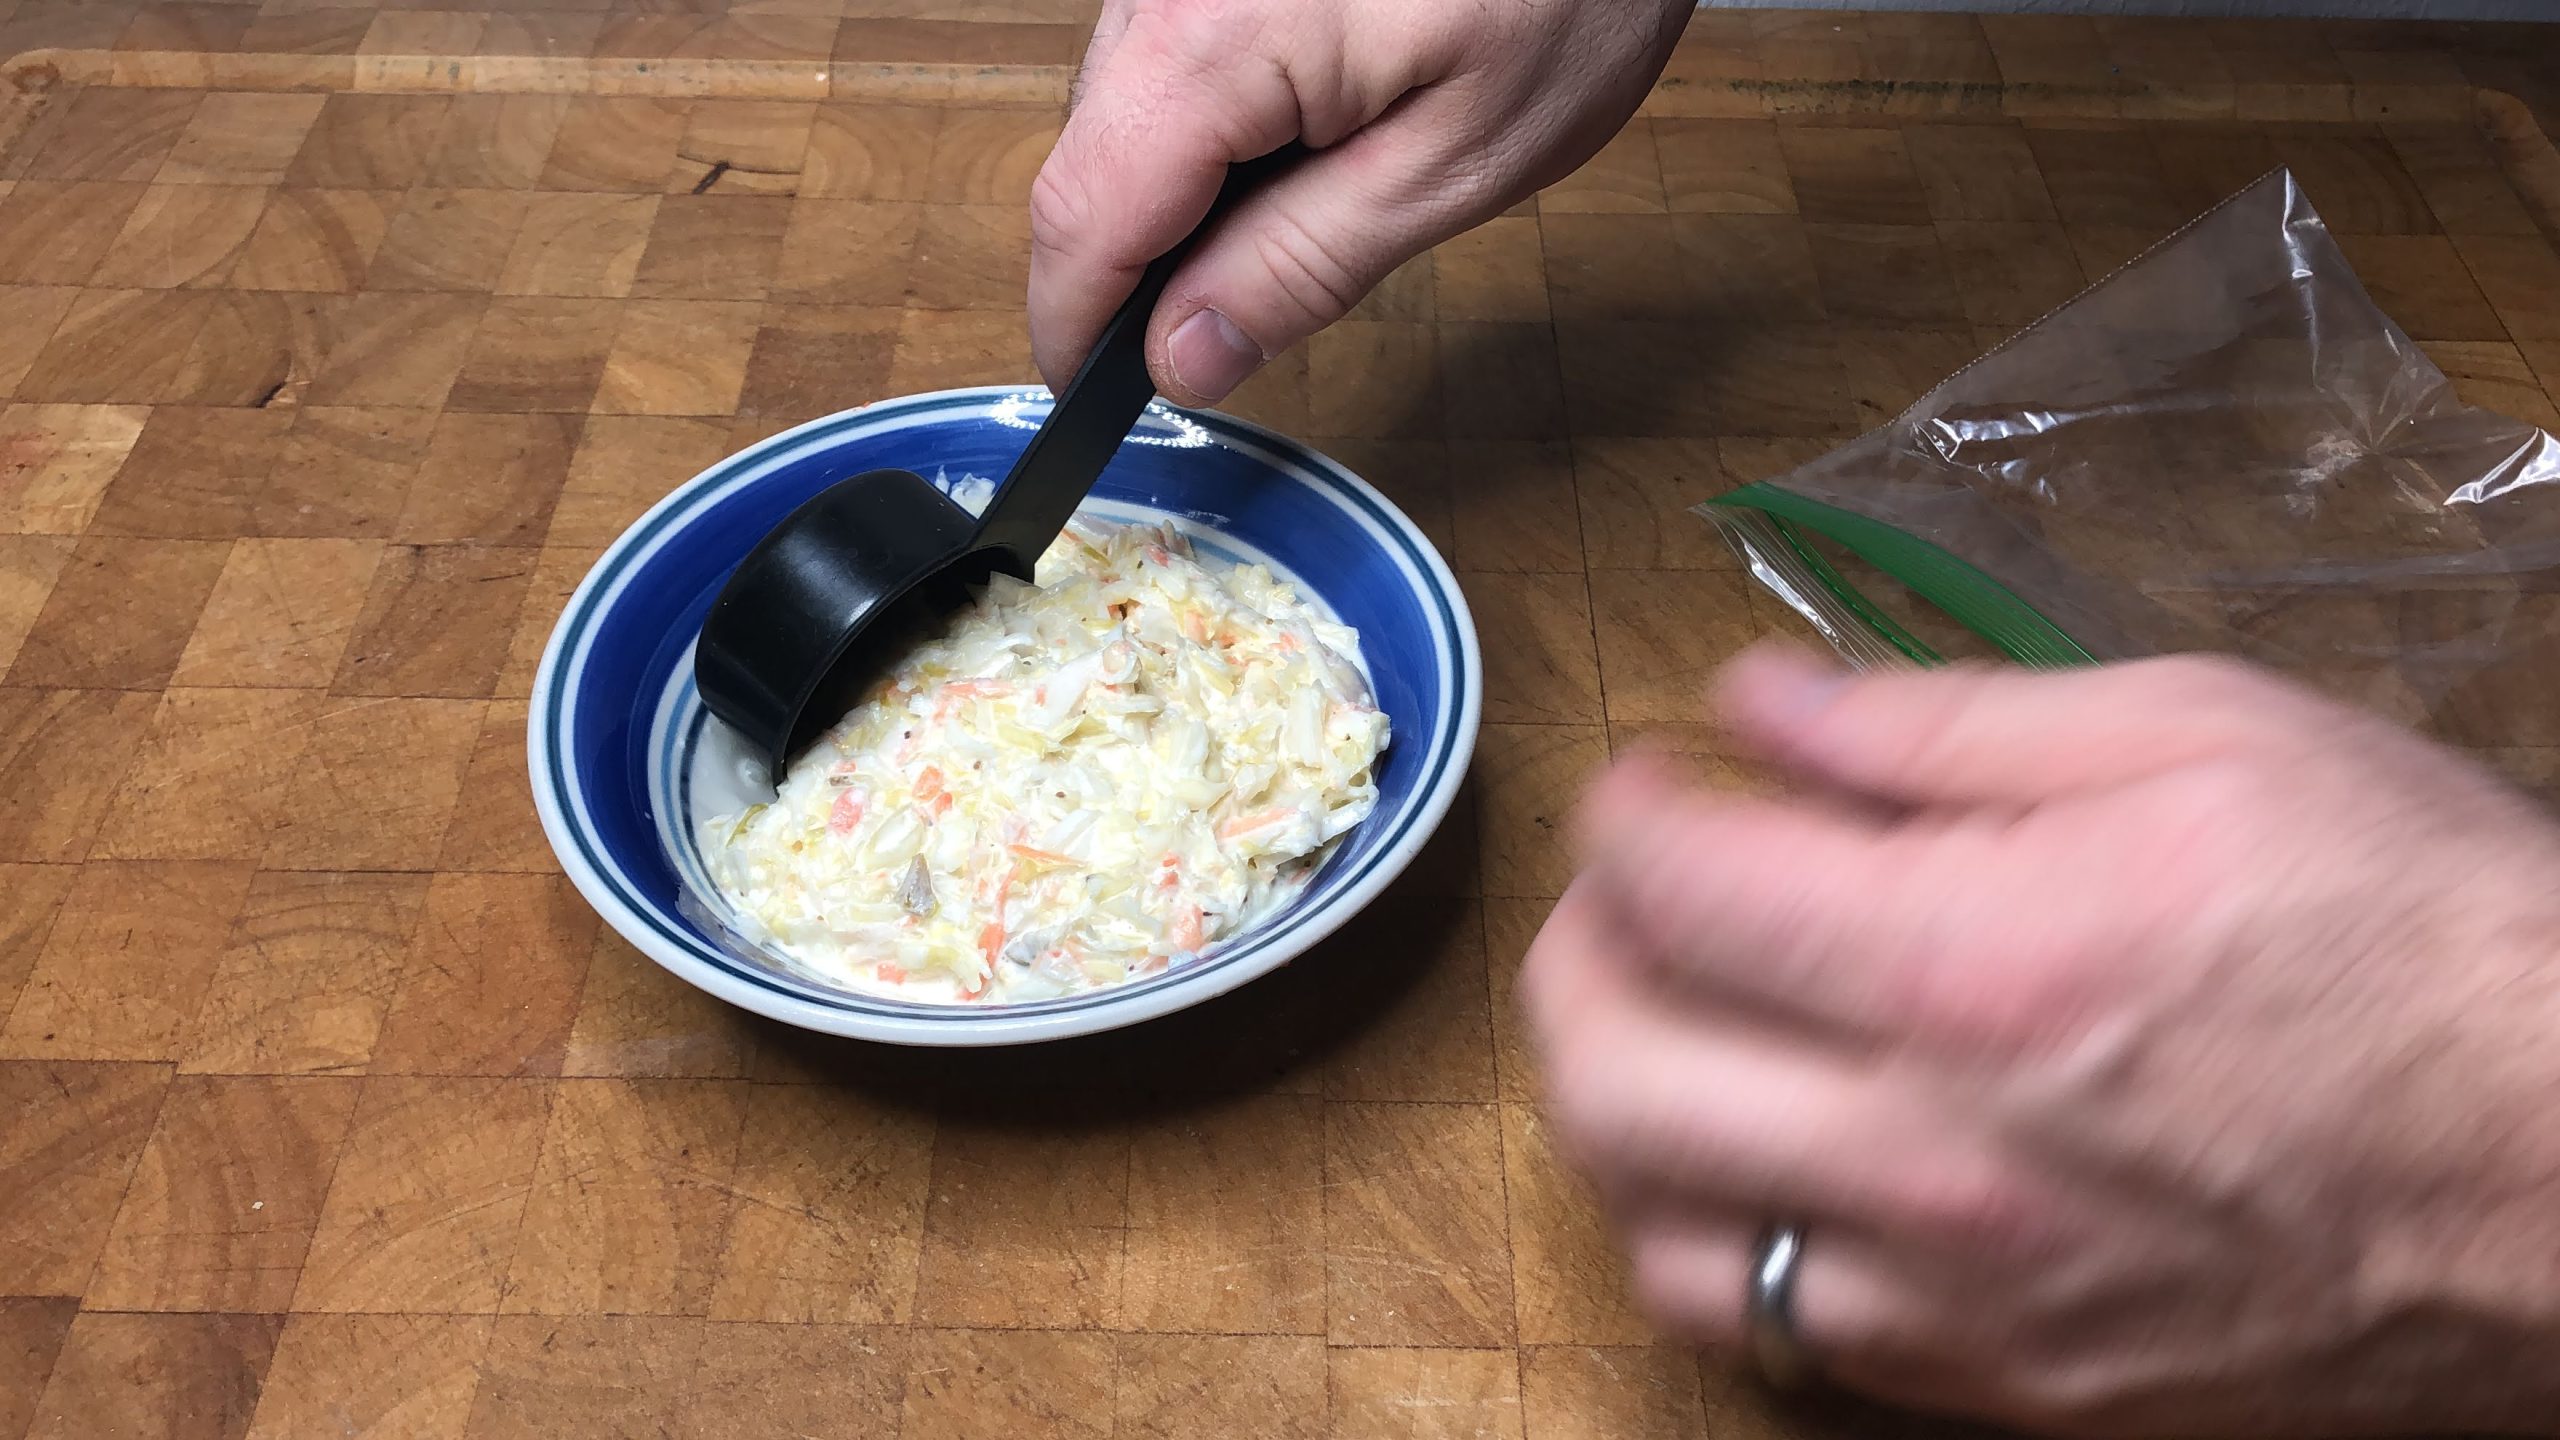 scooping coleslaw into a freezer bag